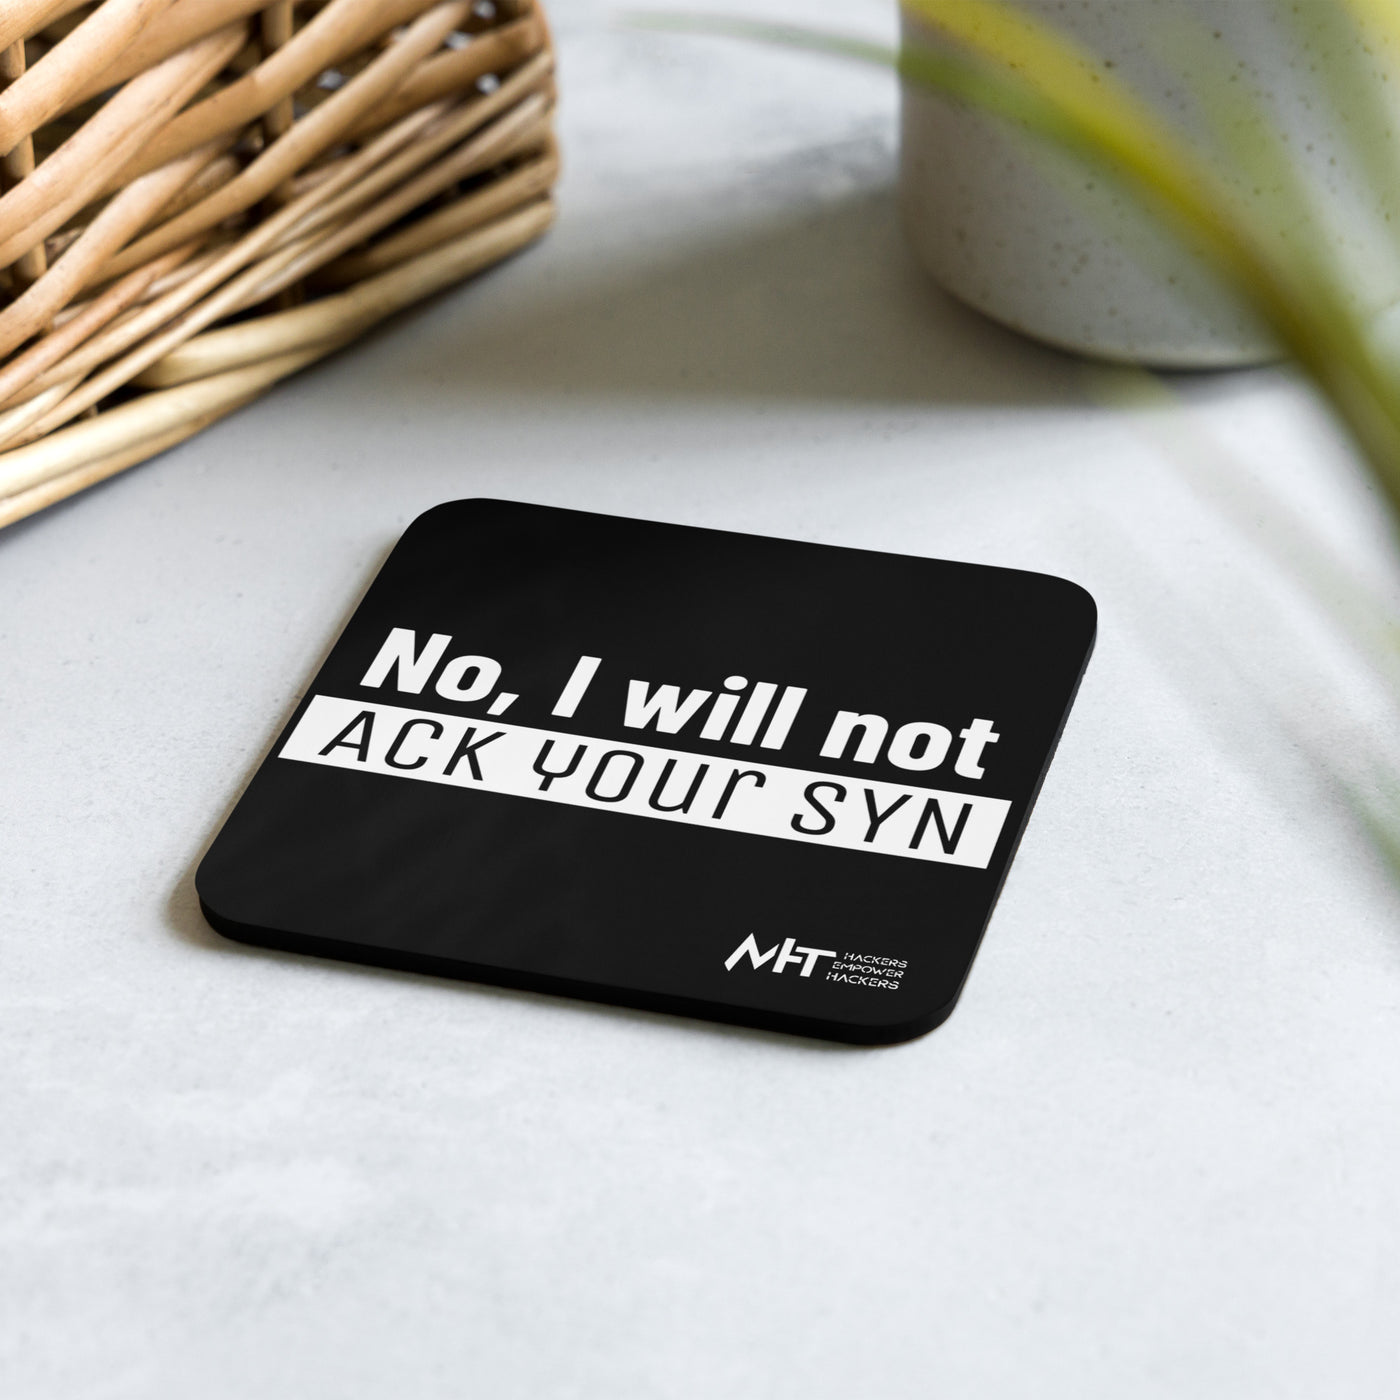 No, I will ack your syn - Cork-back coaster